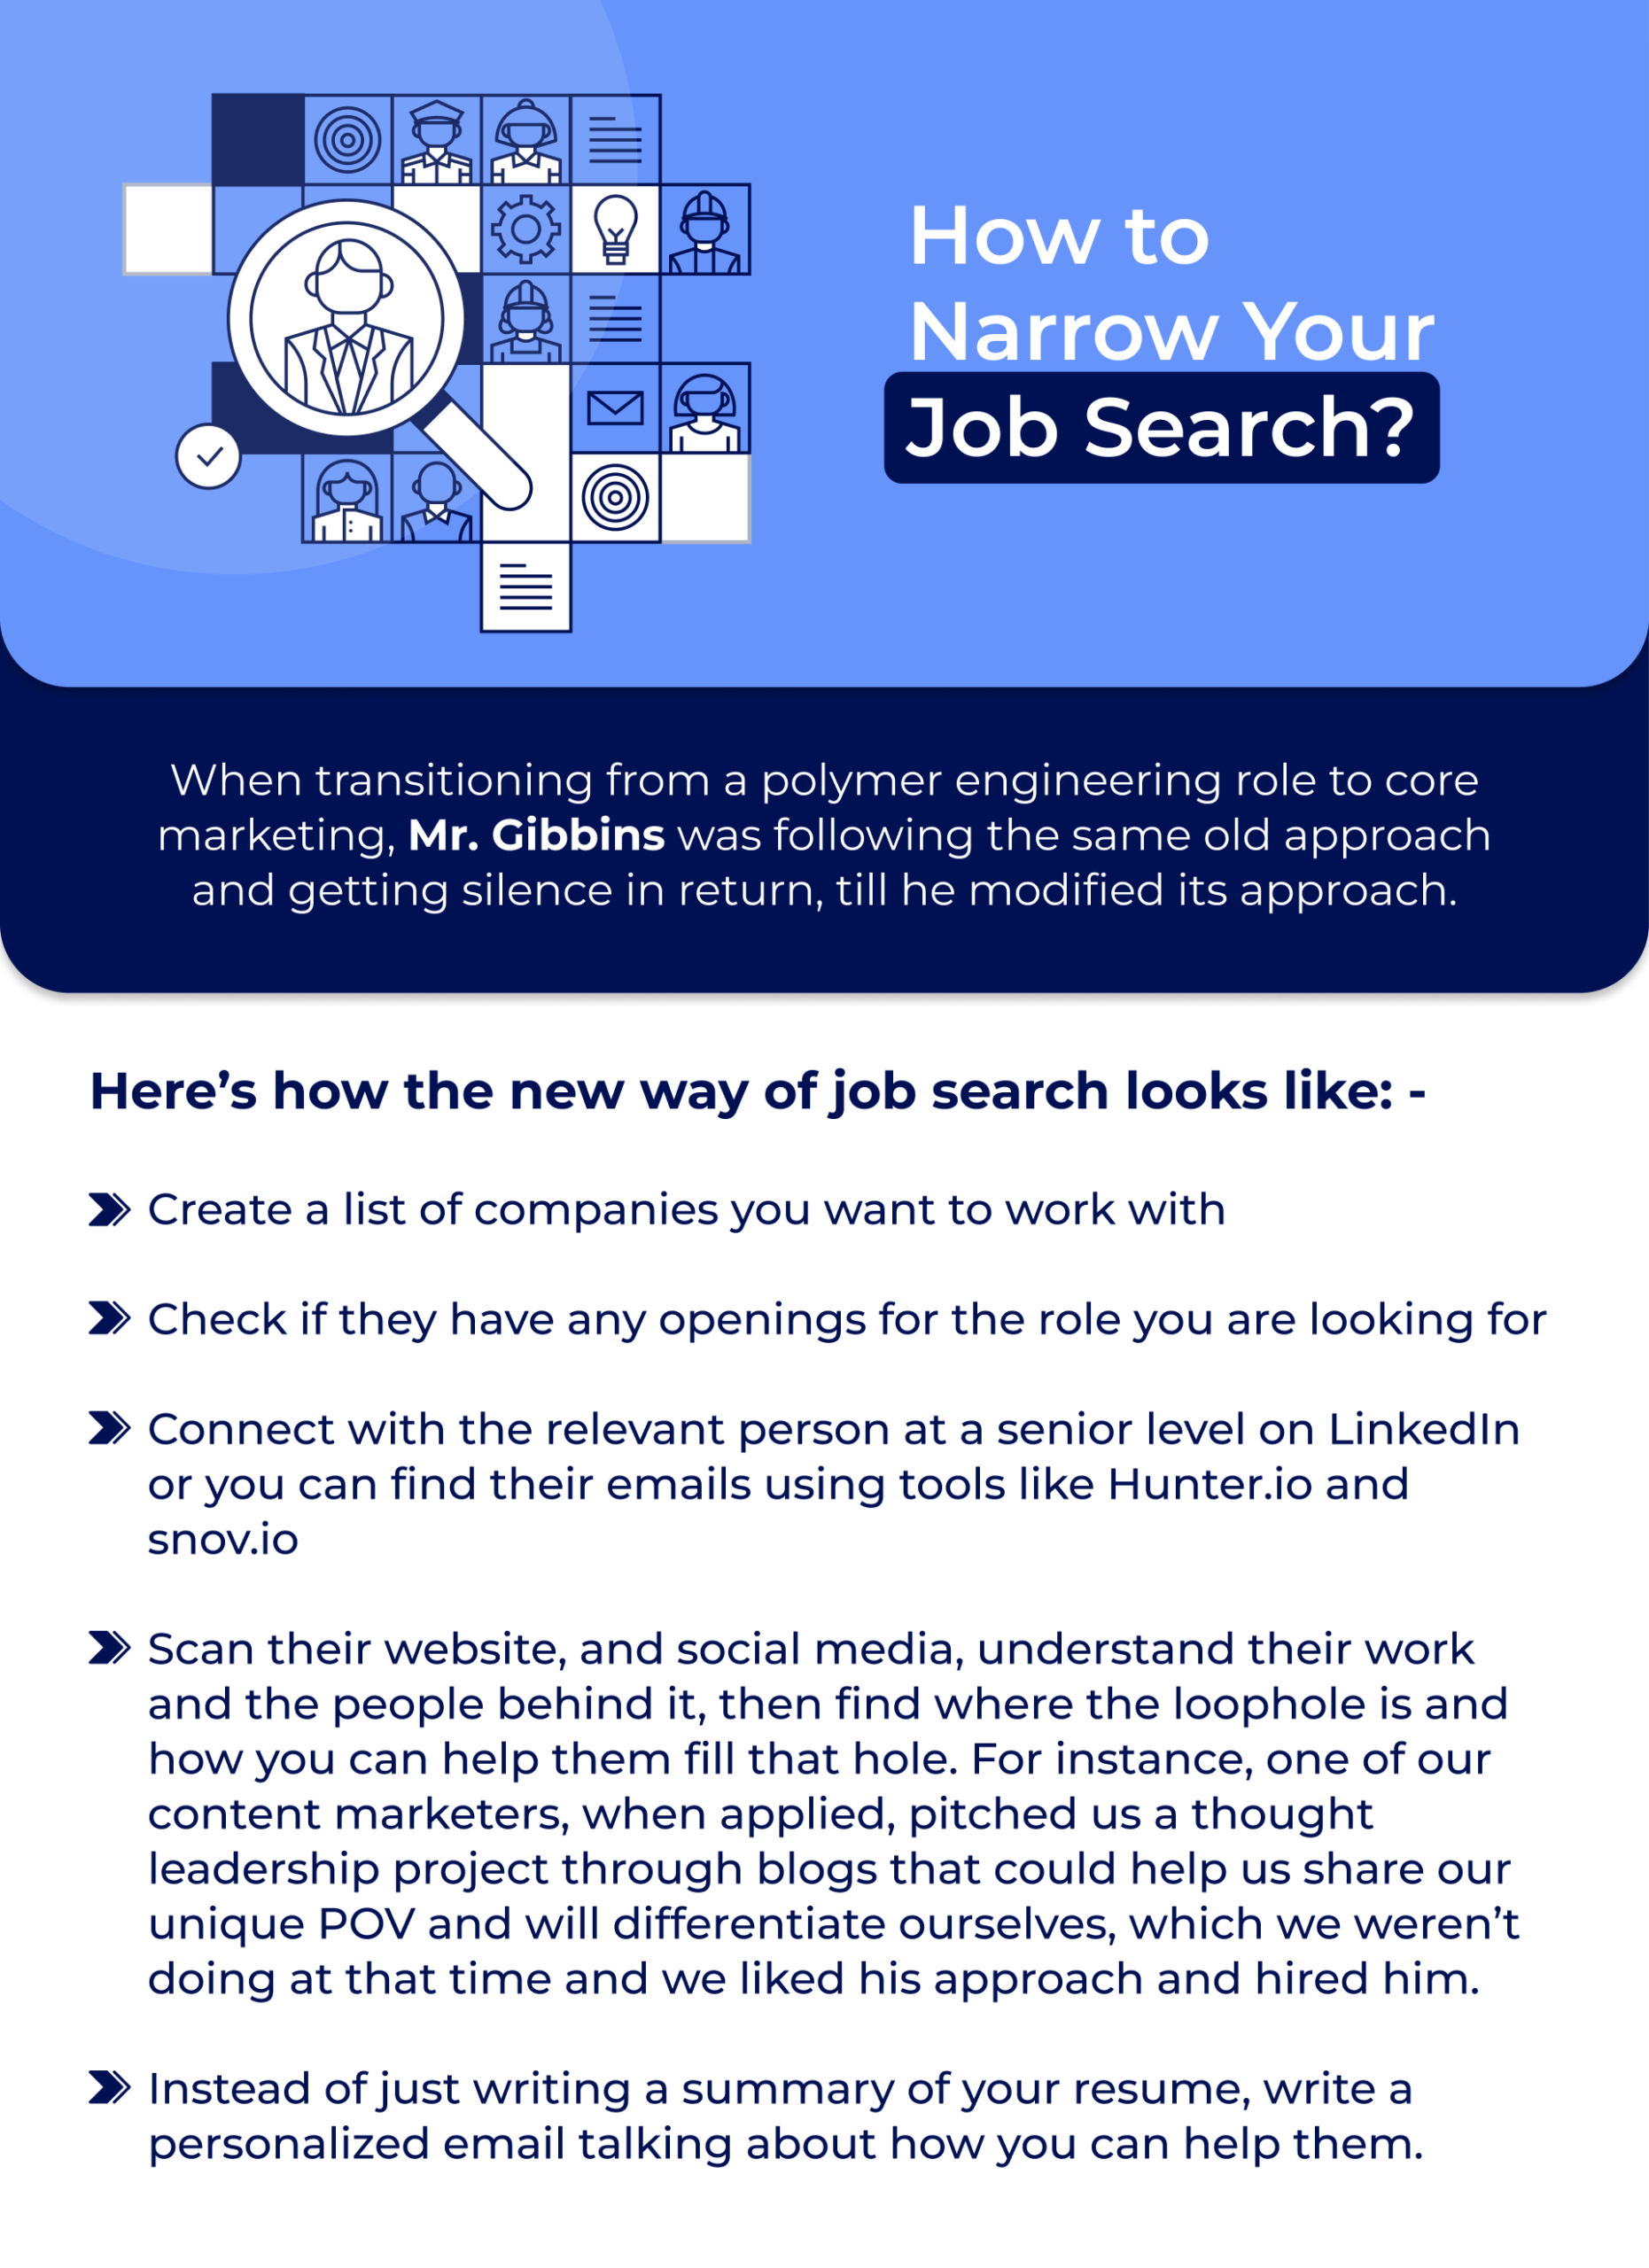 How to Narrow your job search?